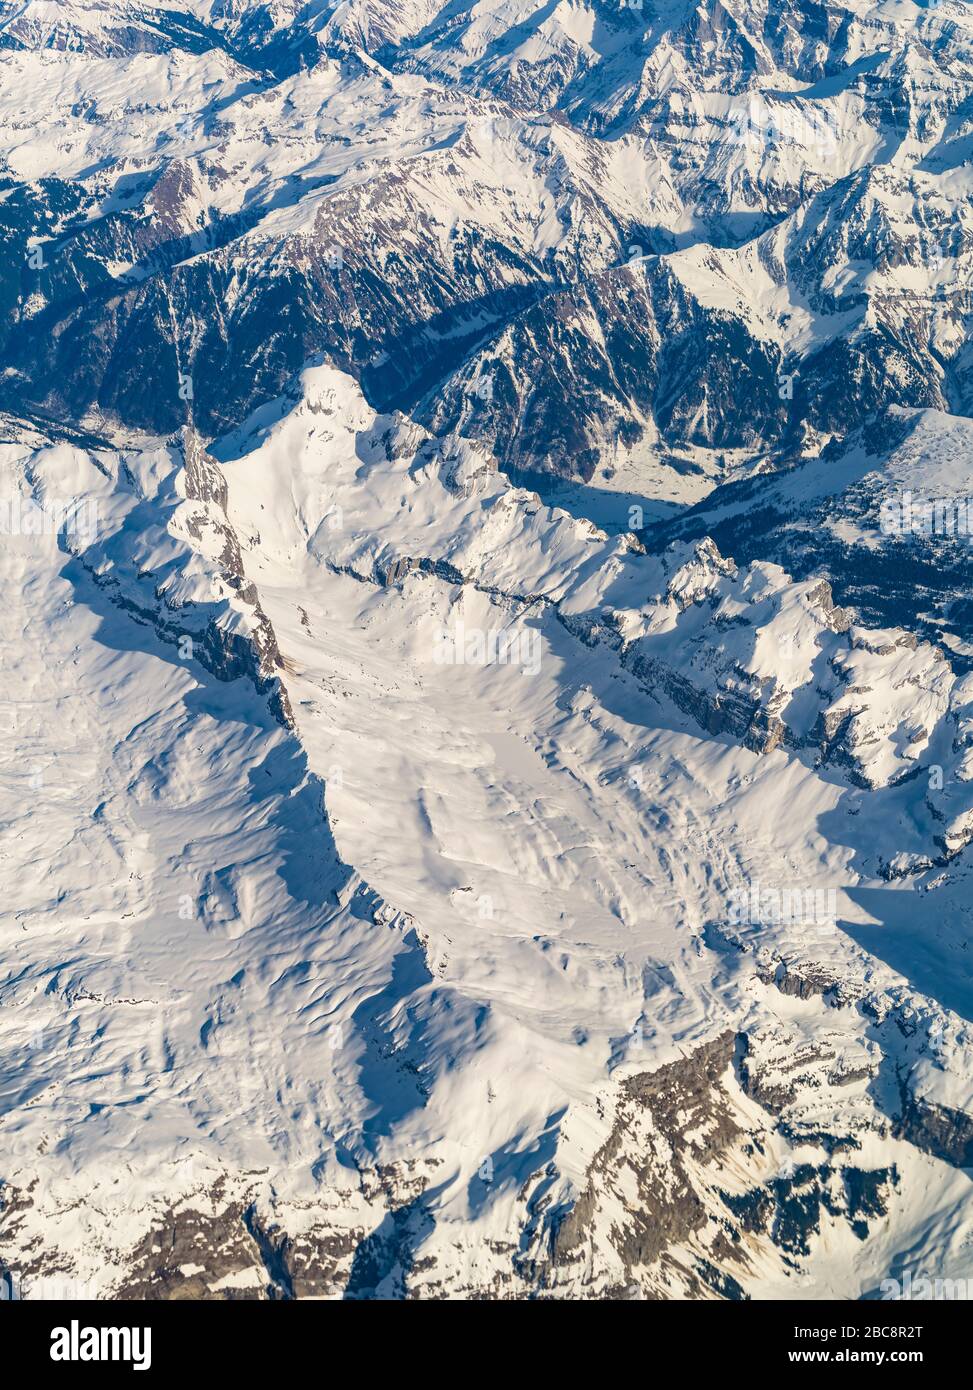 Aerial view, Swiss Alps with snowy mountains Stock Photo